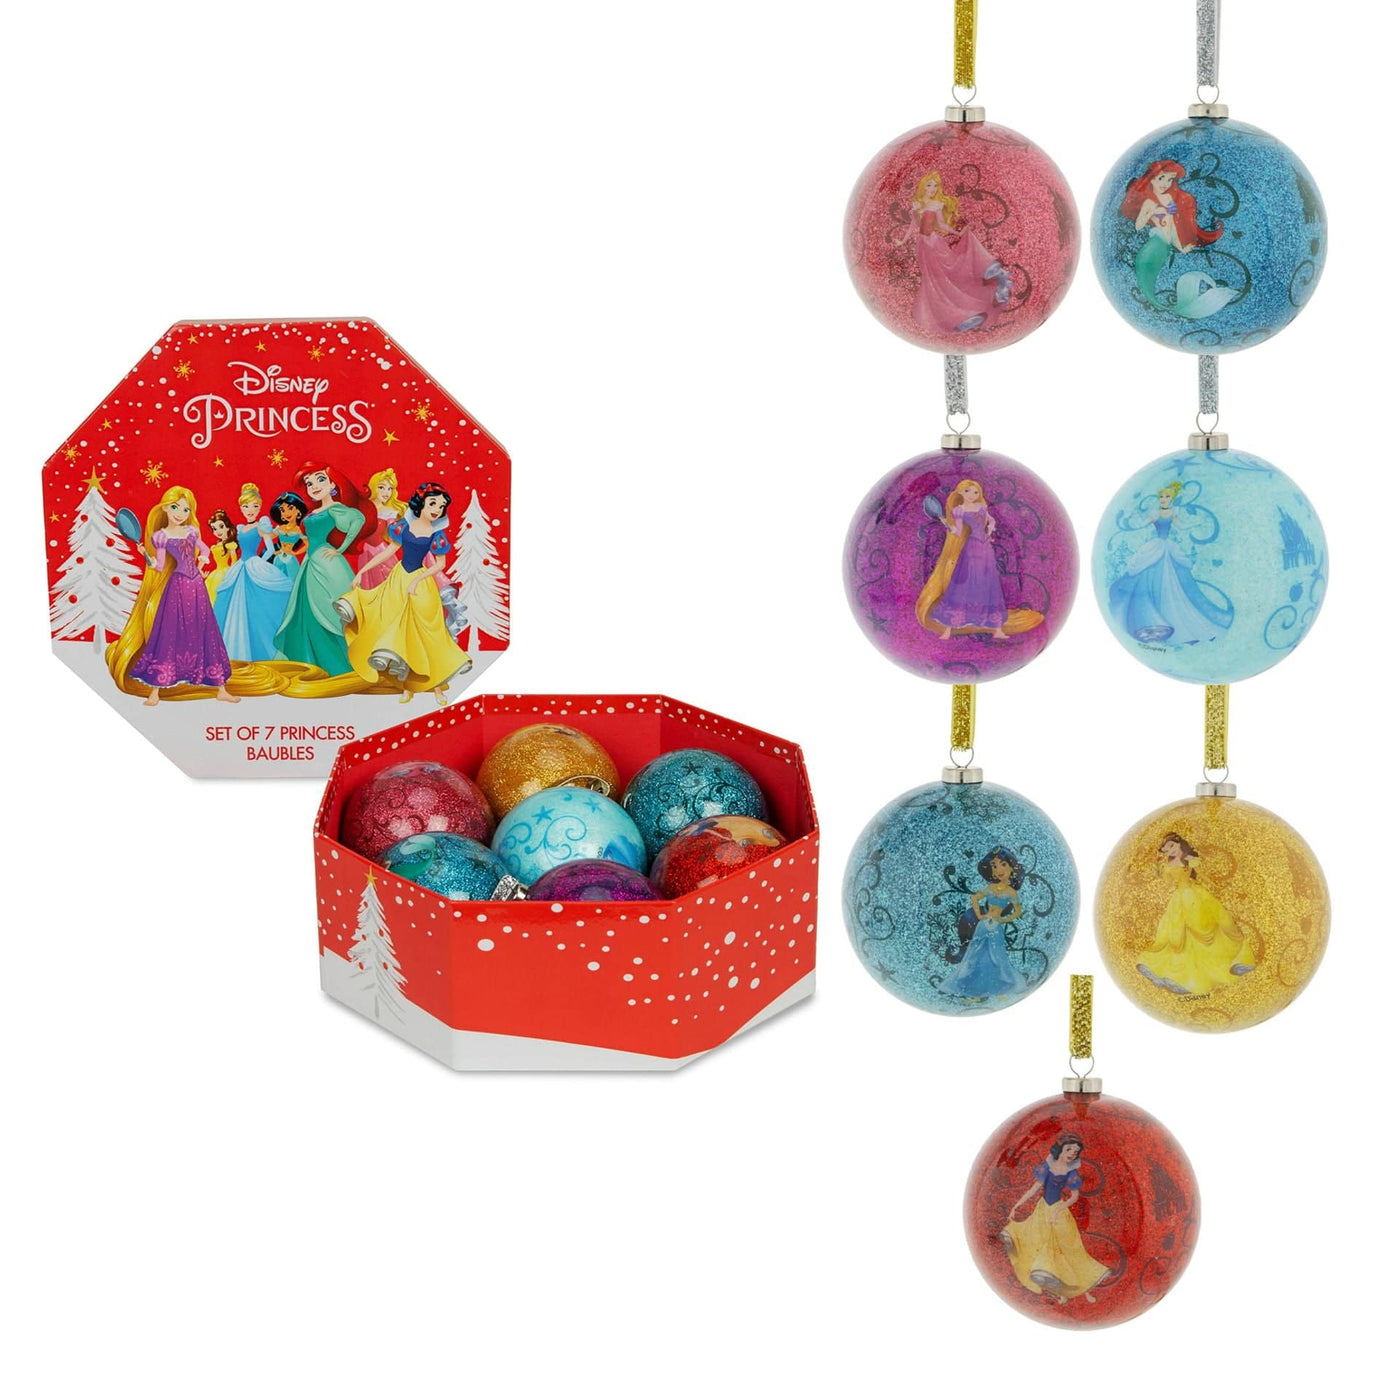 Widdop Gifts Christmas Decorations Disney Set of 7 Princess Christmas Baubles